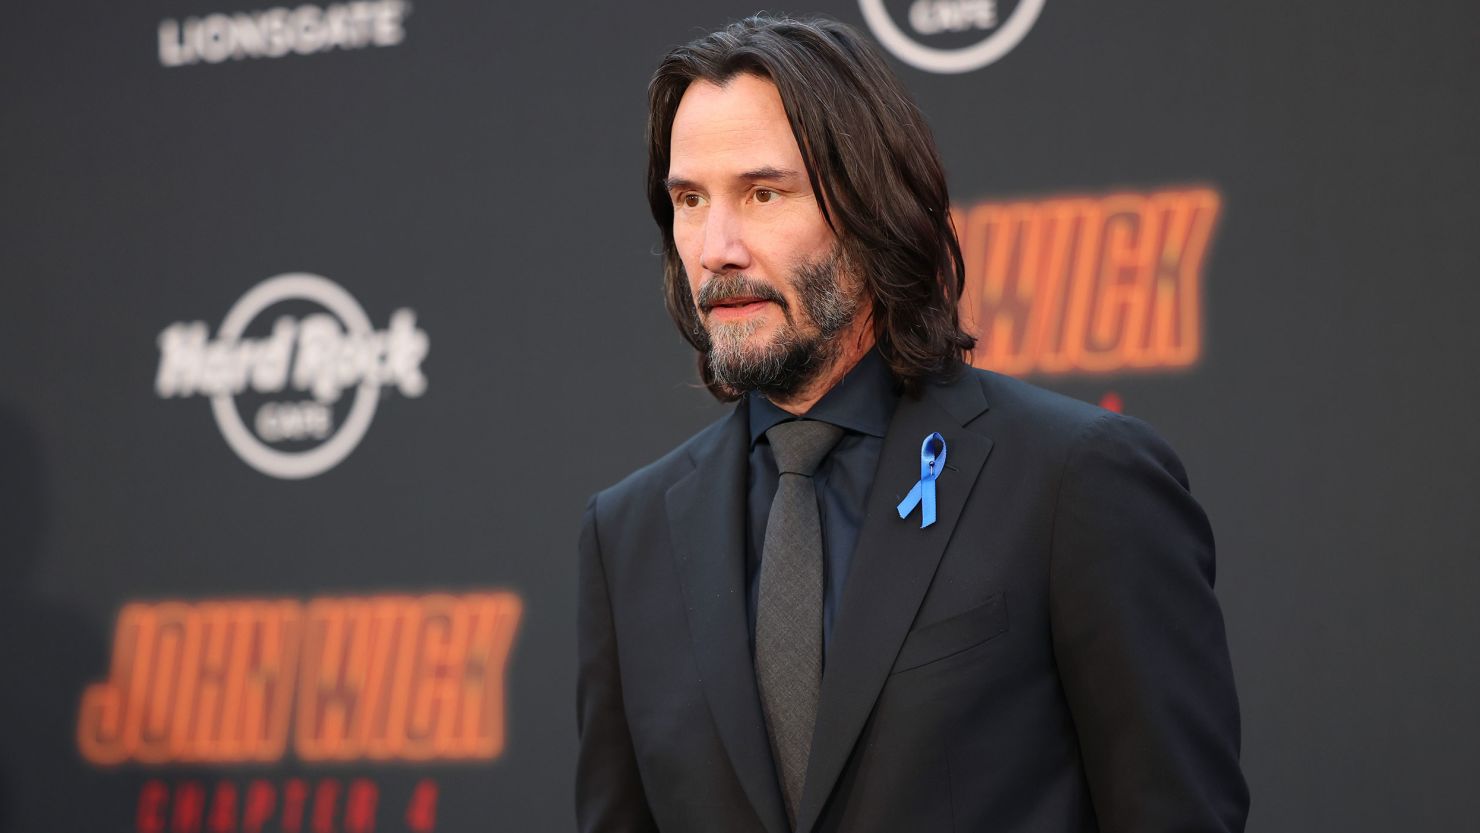 John Wick: Chapter 4: Other Roles You've Seen the Actors Play